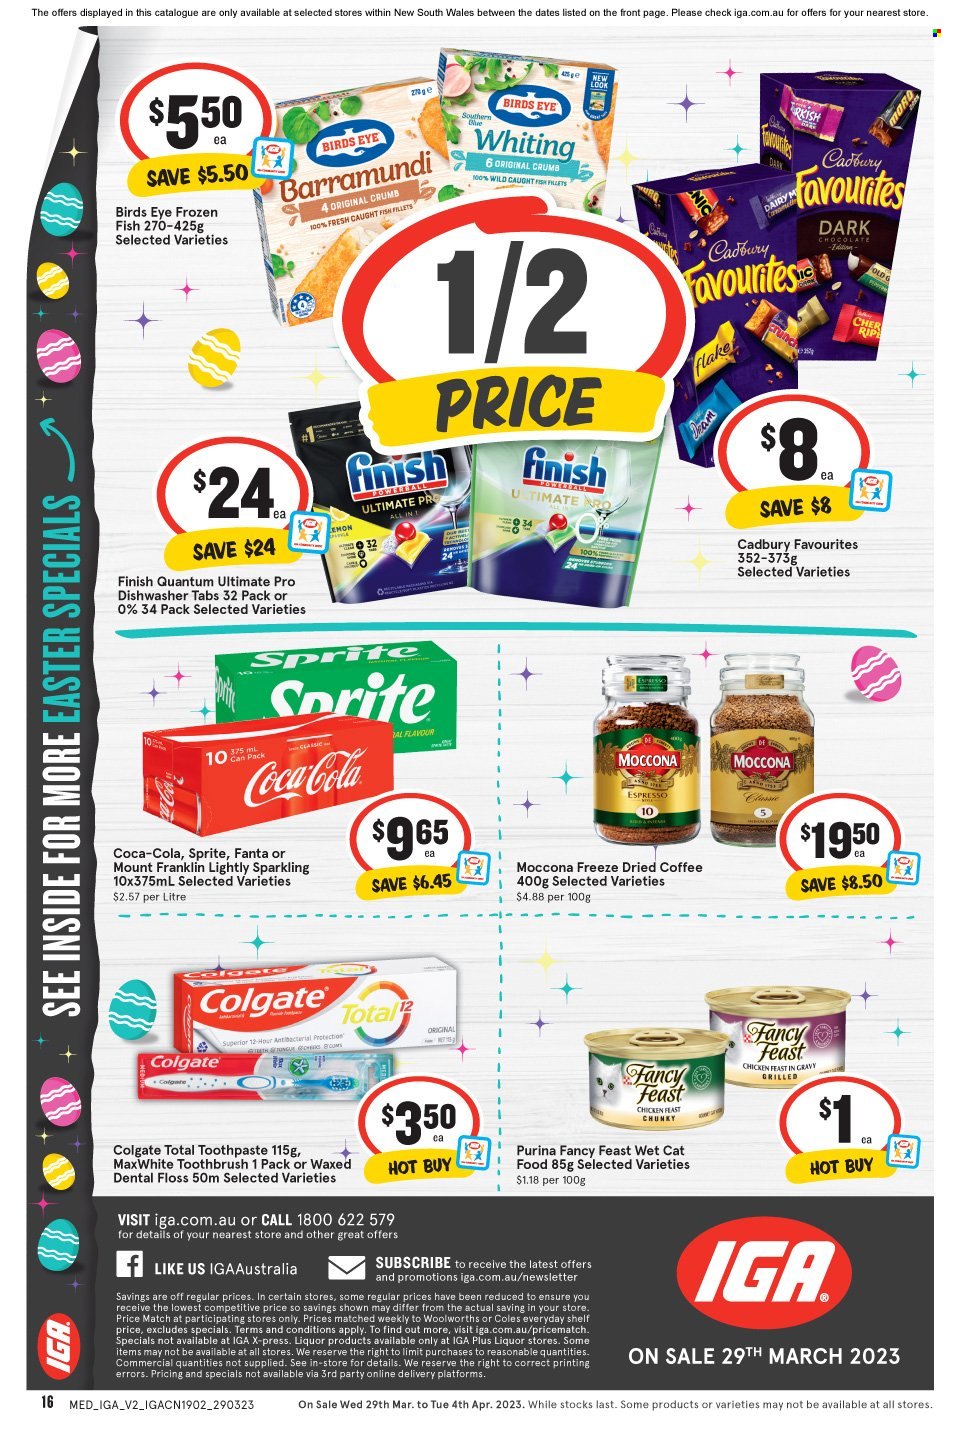 thumbnail - IGA Catalogue - 29 Mar 2023 - 4 Apr 2023 - Sales products - barramundi, fish fillets, fish, whiting, Bird's Eye, Cadbury, Coca-Cola, Sprite, Fanta, coffee, Moccona, Finish Powerball, Finish Quantum Ultimate, Colgate, toothbrush, toothpaste, animal food, cat food, Purina, Fancy Feast, wet cat food. Page 12.